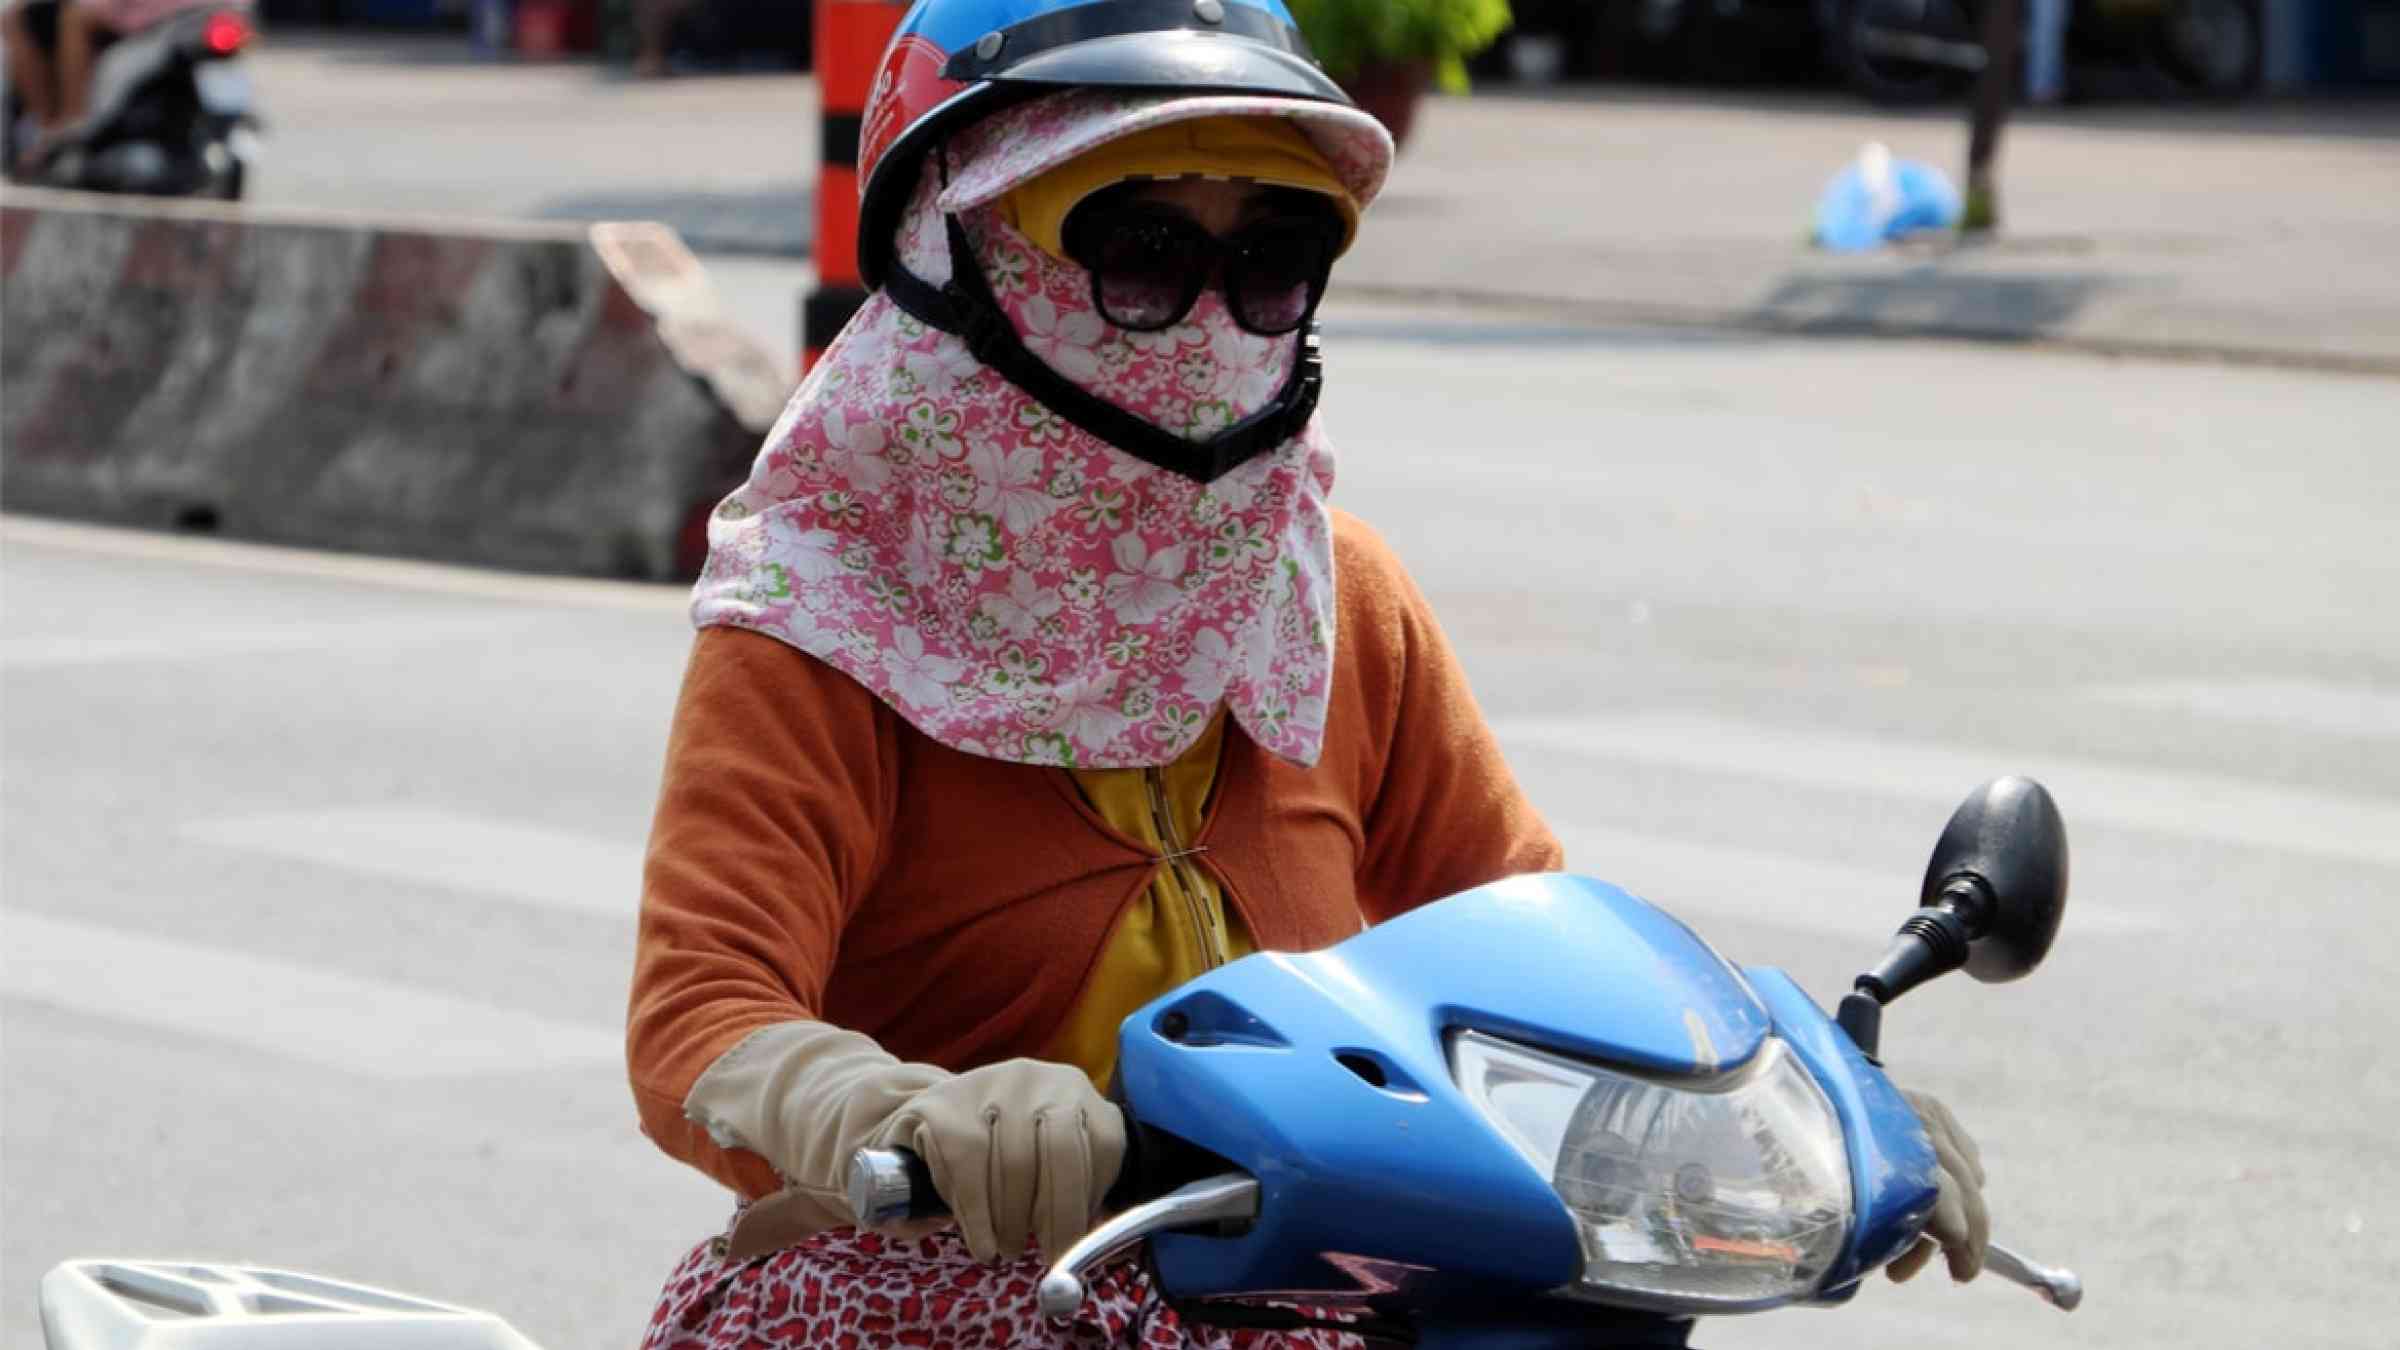 Vietnamese woman wear glasses, face mask, coat, gloves to sun protection, ride motorbike under high temperature in Ho Chi Mihn City, Vietnam (2019)